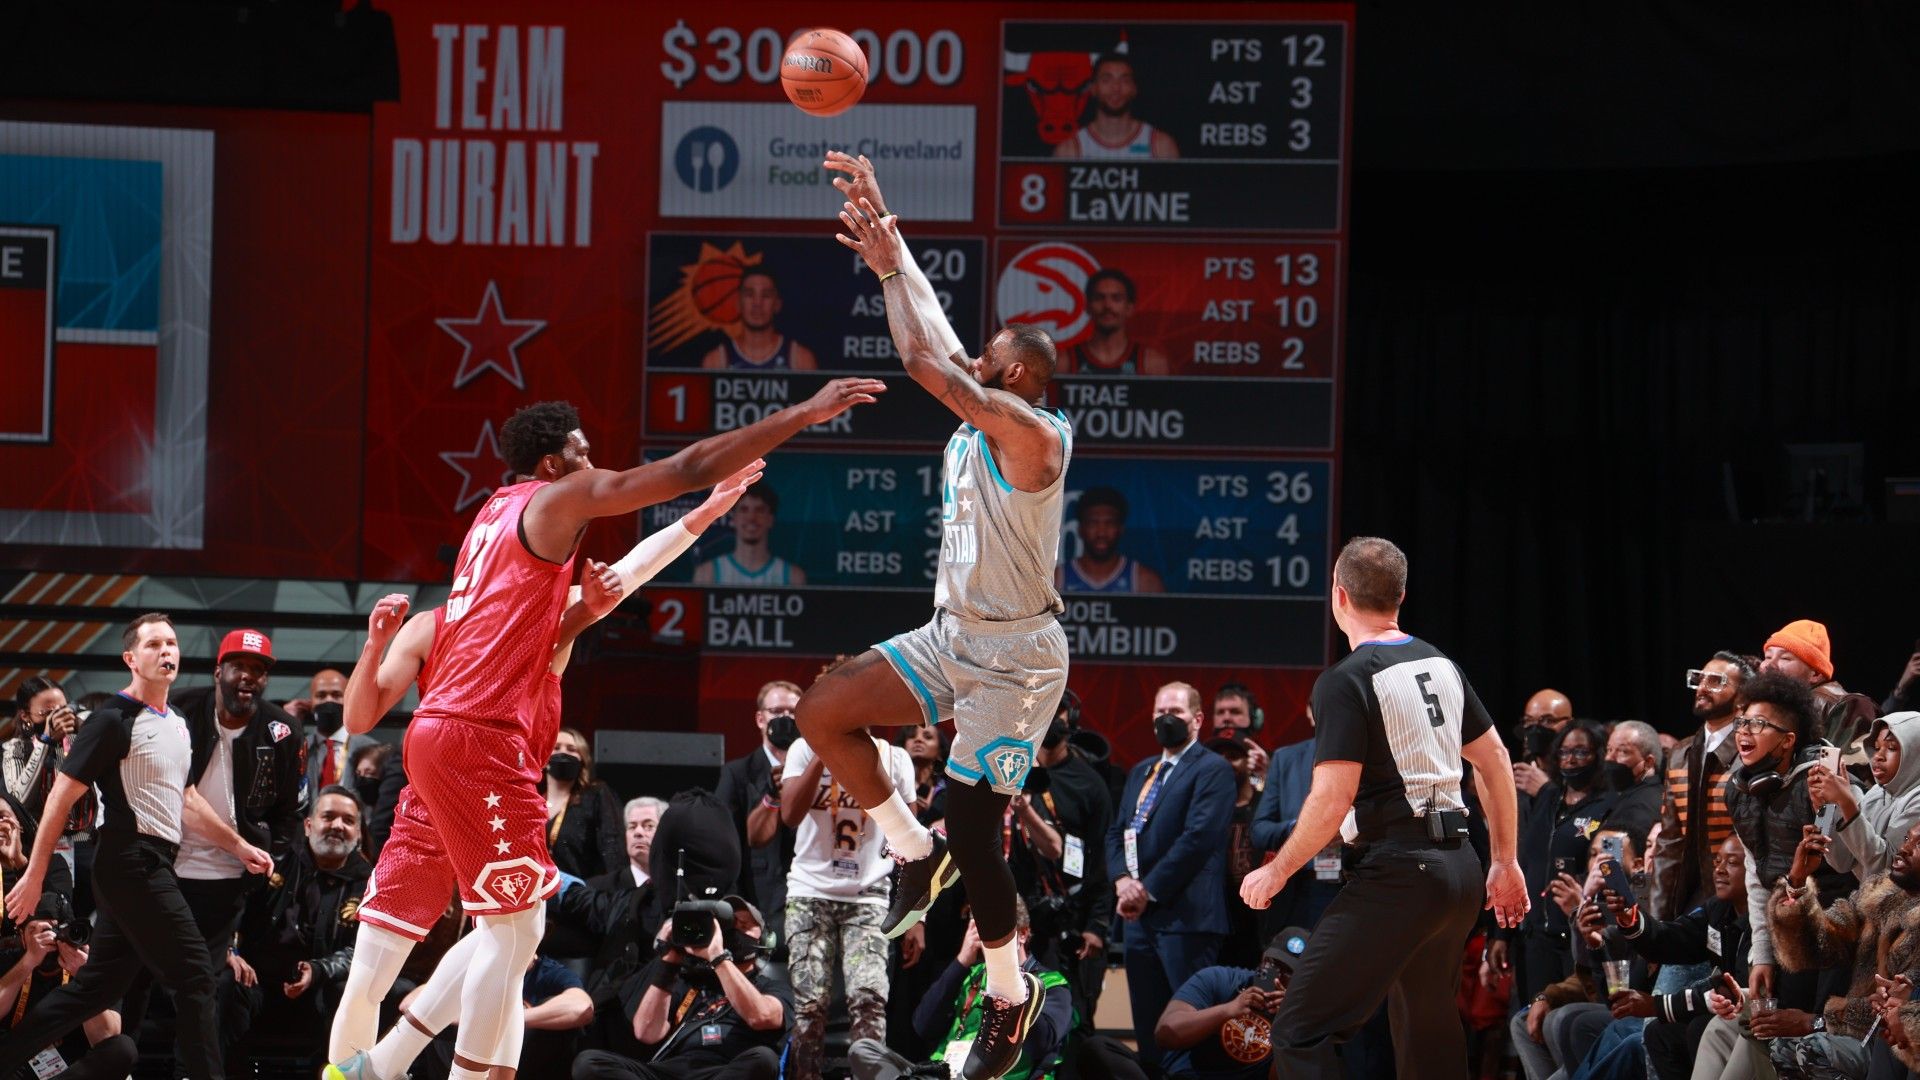 NBA All-Star Game 2022 results, highlights: Curry drops 50, LeBron James  dagger ices victory over Team Durant